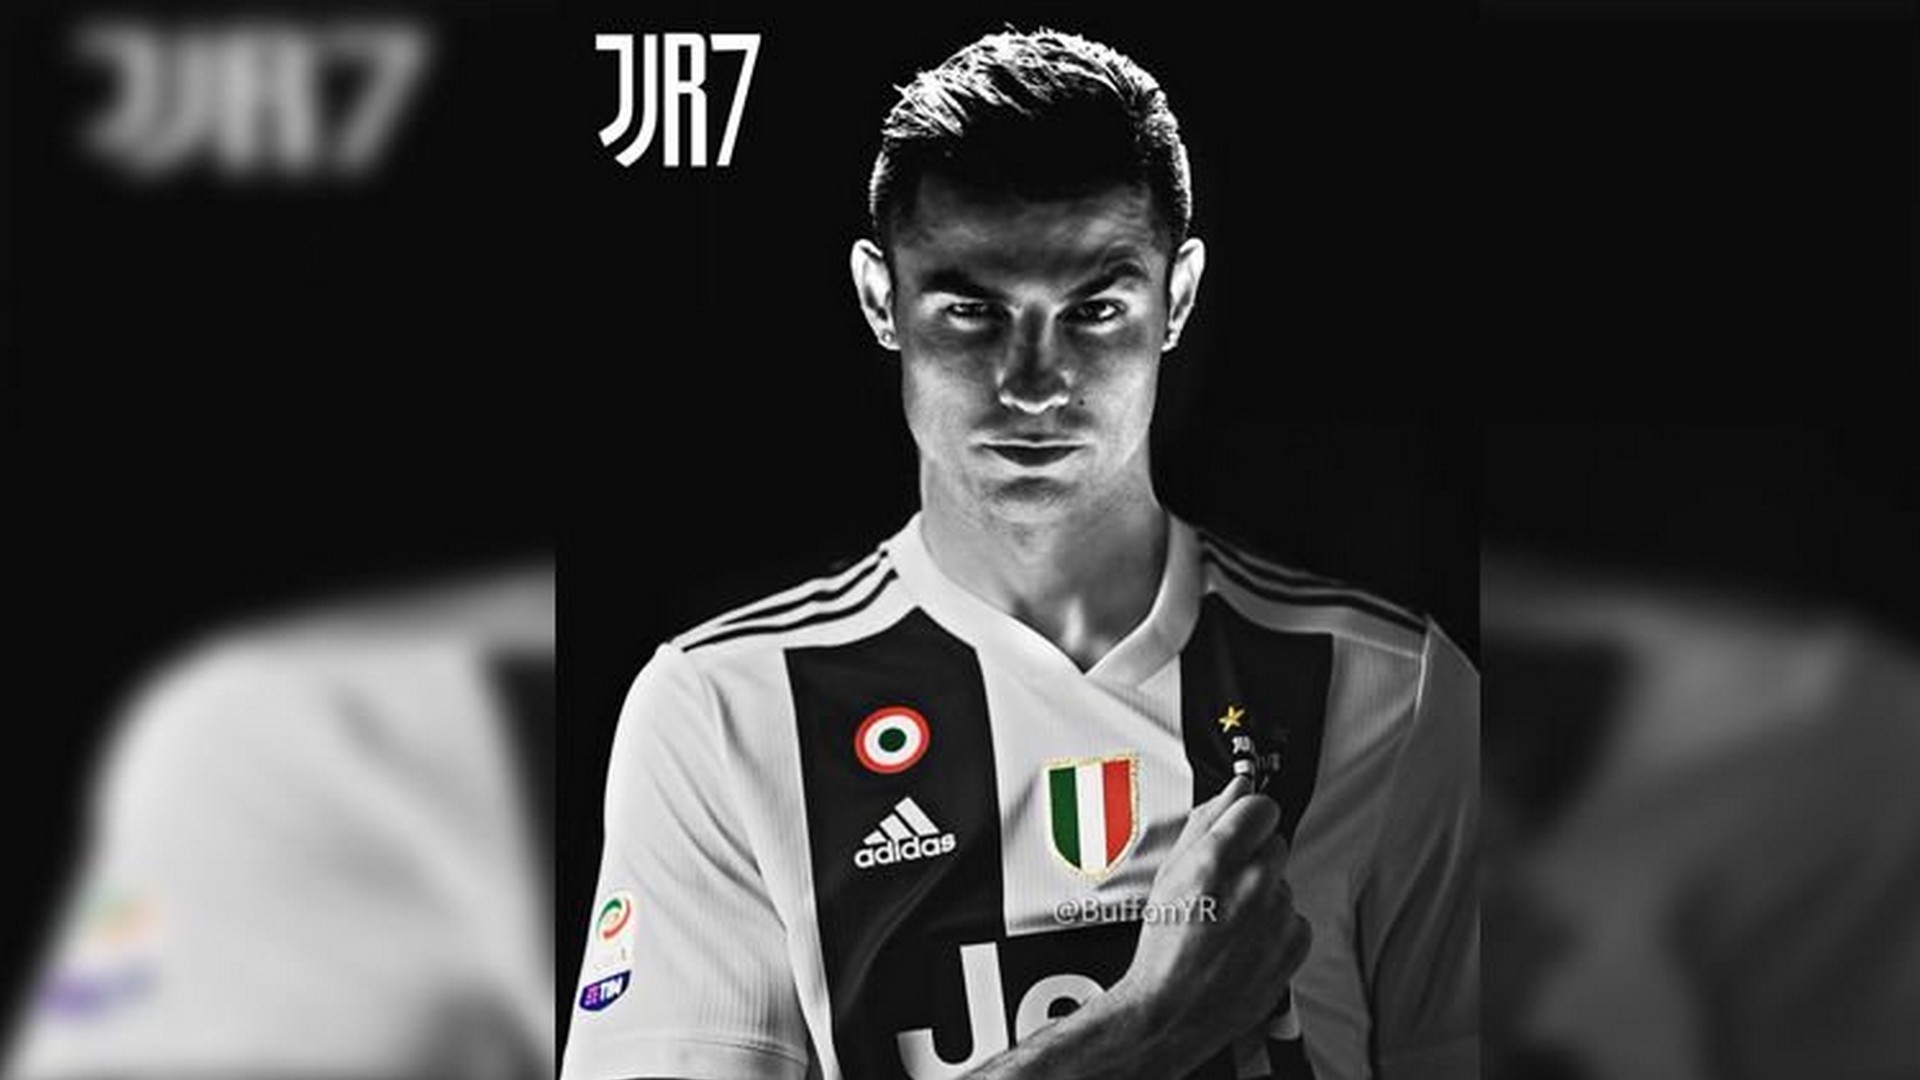 C Ronaldo Juventus Desktop Wallpaper with image resolution 1920x1080 pixel. You can use this wallpaper as background for your desktop Computer Screensavers, Android or iPhone smartphones